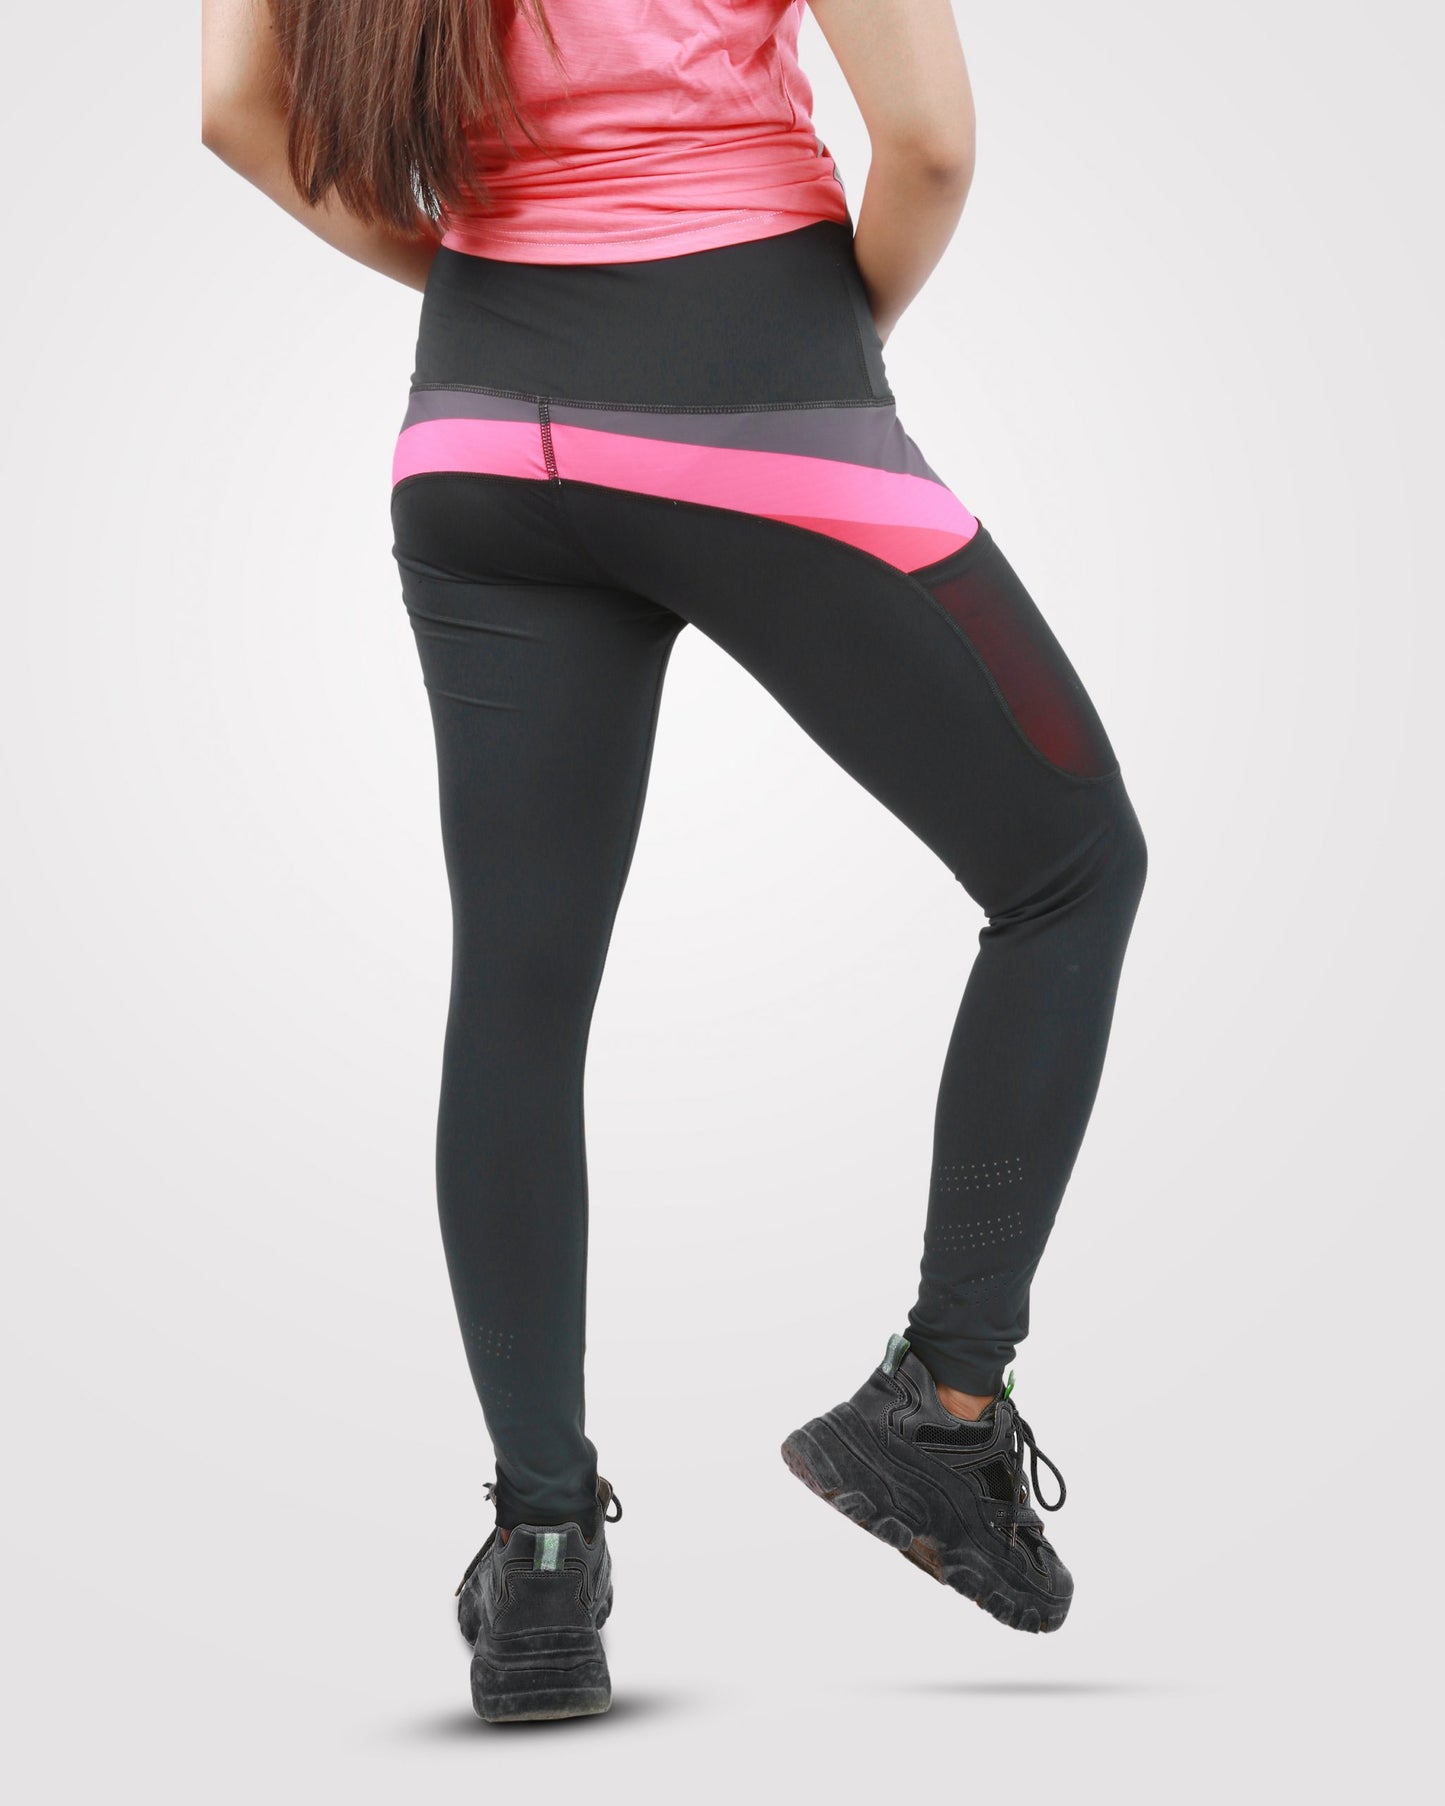 Gym Tights for Women’s with Pocket Pink - outgearsfitness